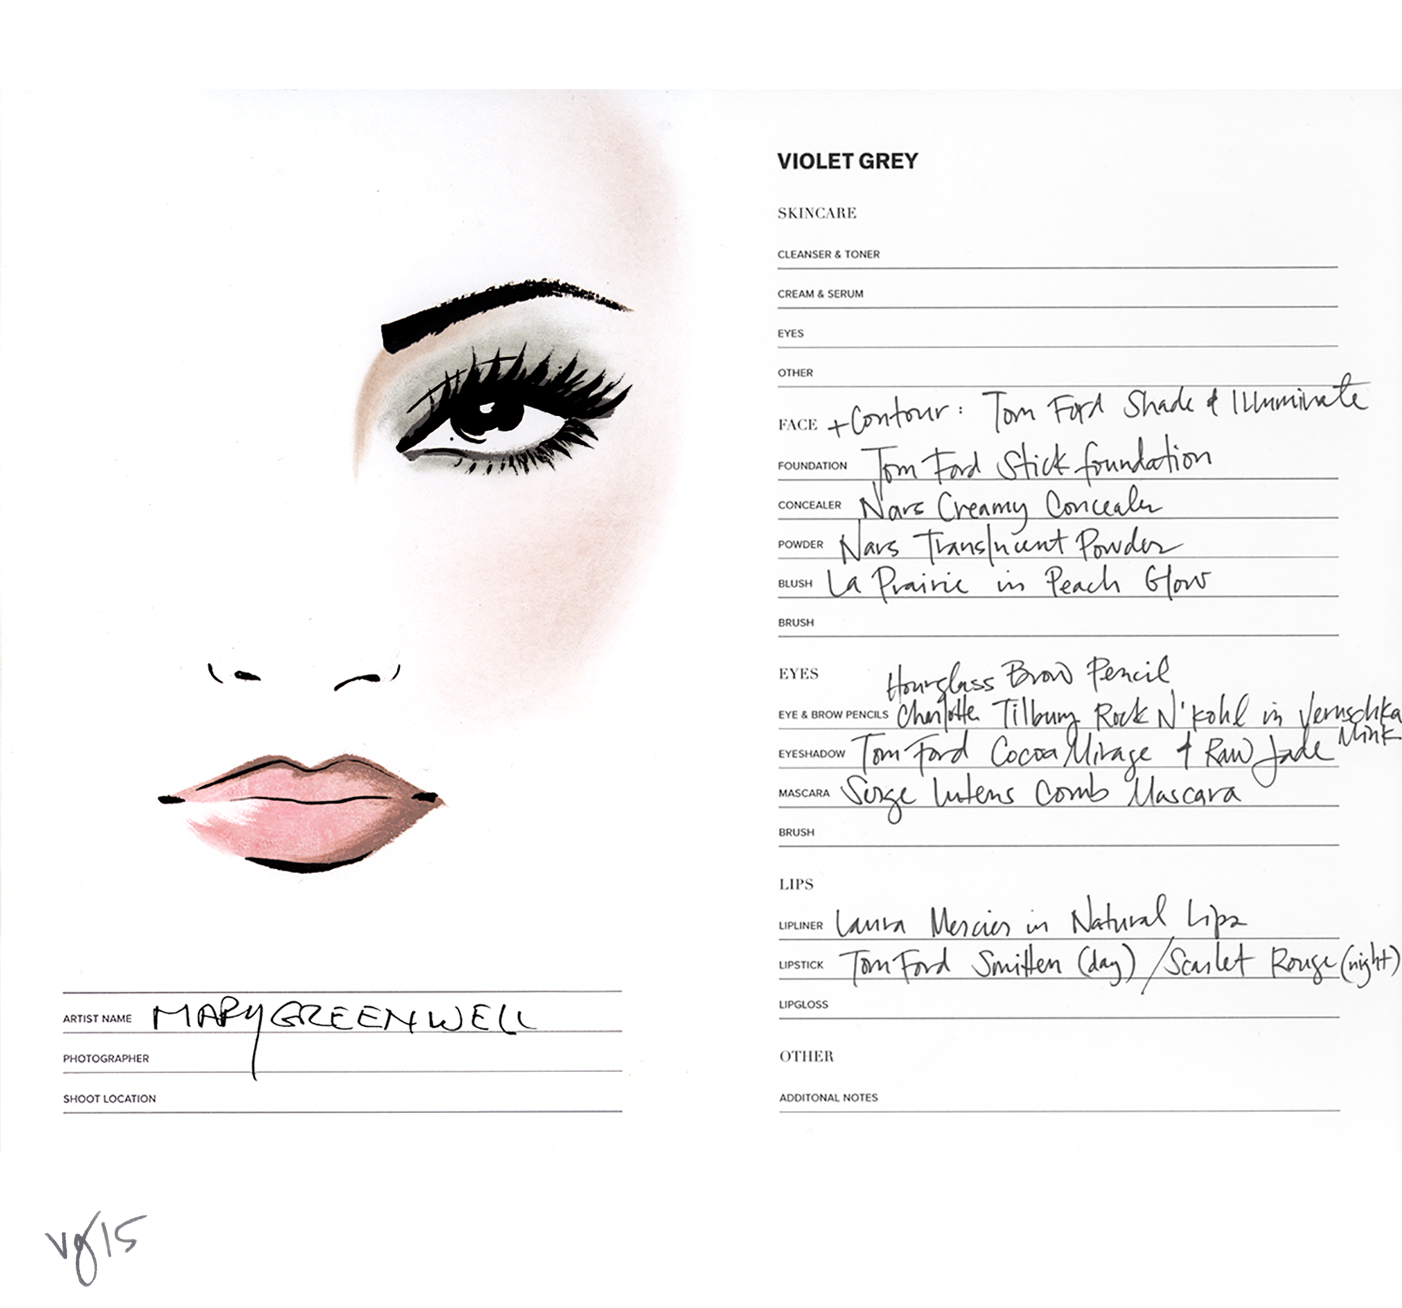 ORIGINAL LOOK: The Jade Smoky Eye by Mary Greenwell  |  #VIOLETGREY, The Industry's Beauty Edit